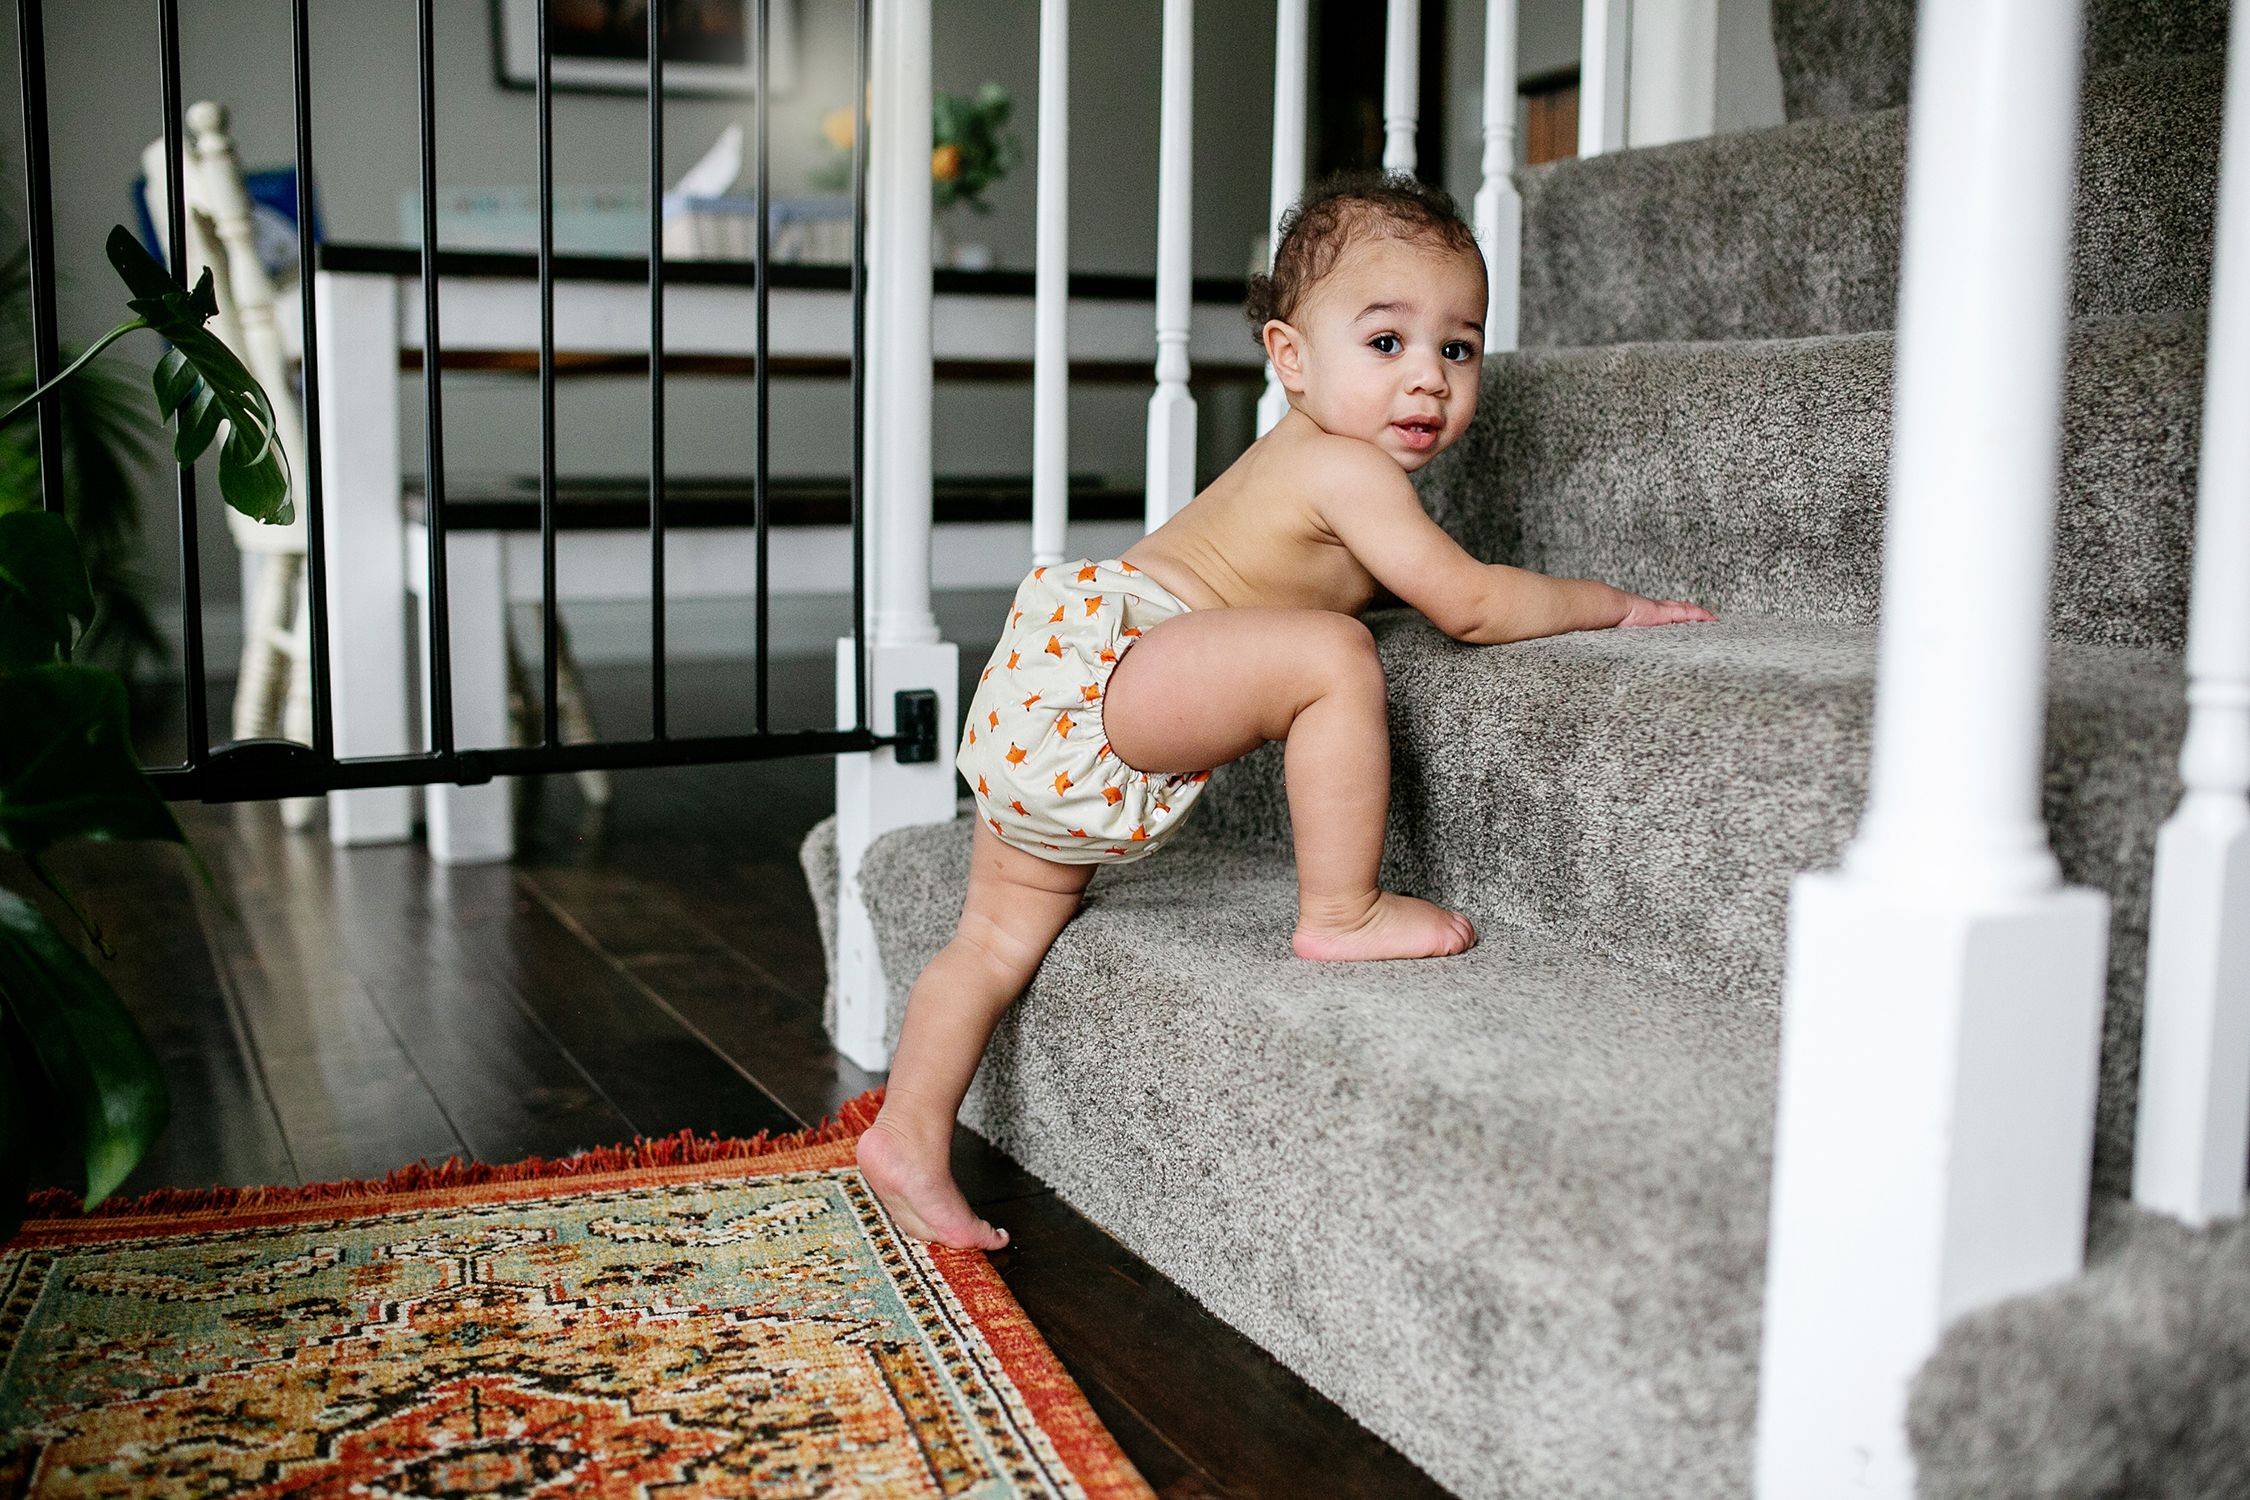 Baby climbing up the steps in our latest design from Simple Being, an Ocean Animals themed cloth diaper with whimsical starfish.